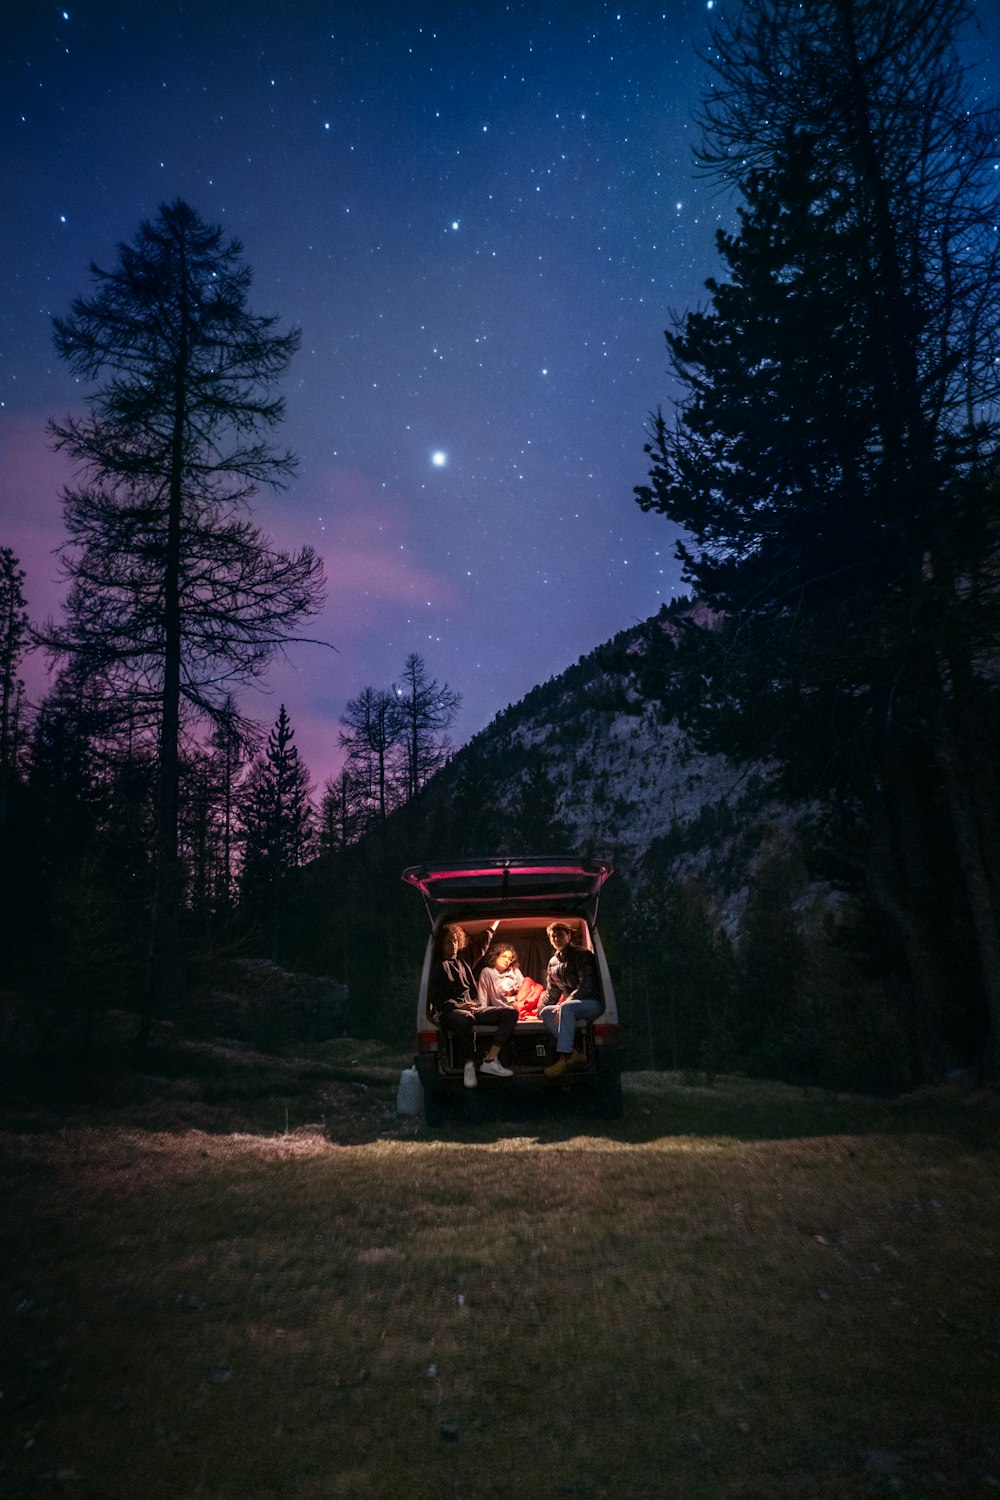 a group of people sitting in a golf cart under a night sky